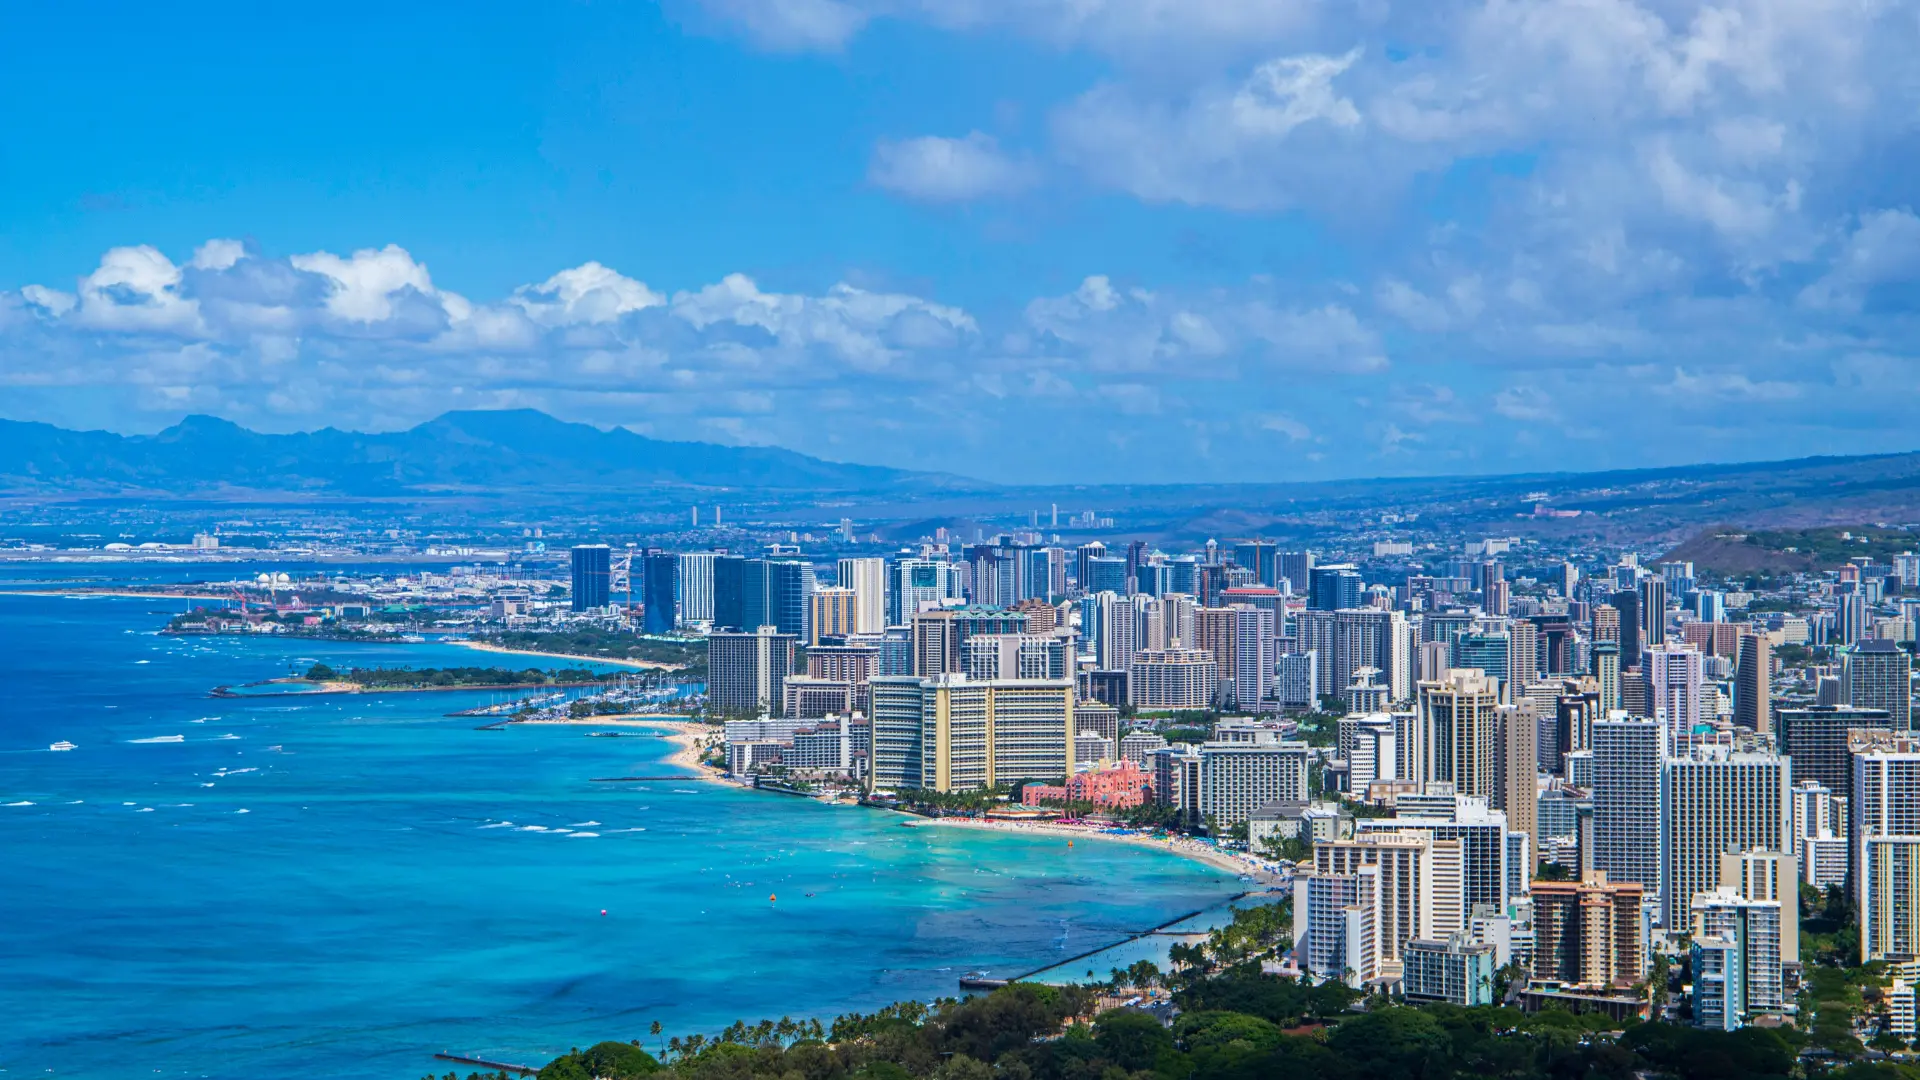 Aerial view of Honolulu showcasing its skyscrapers and beaches